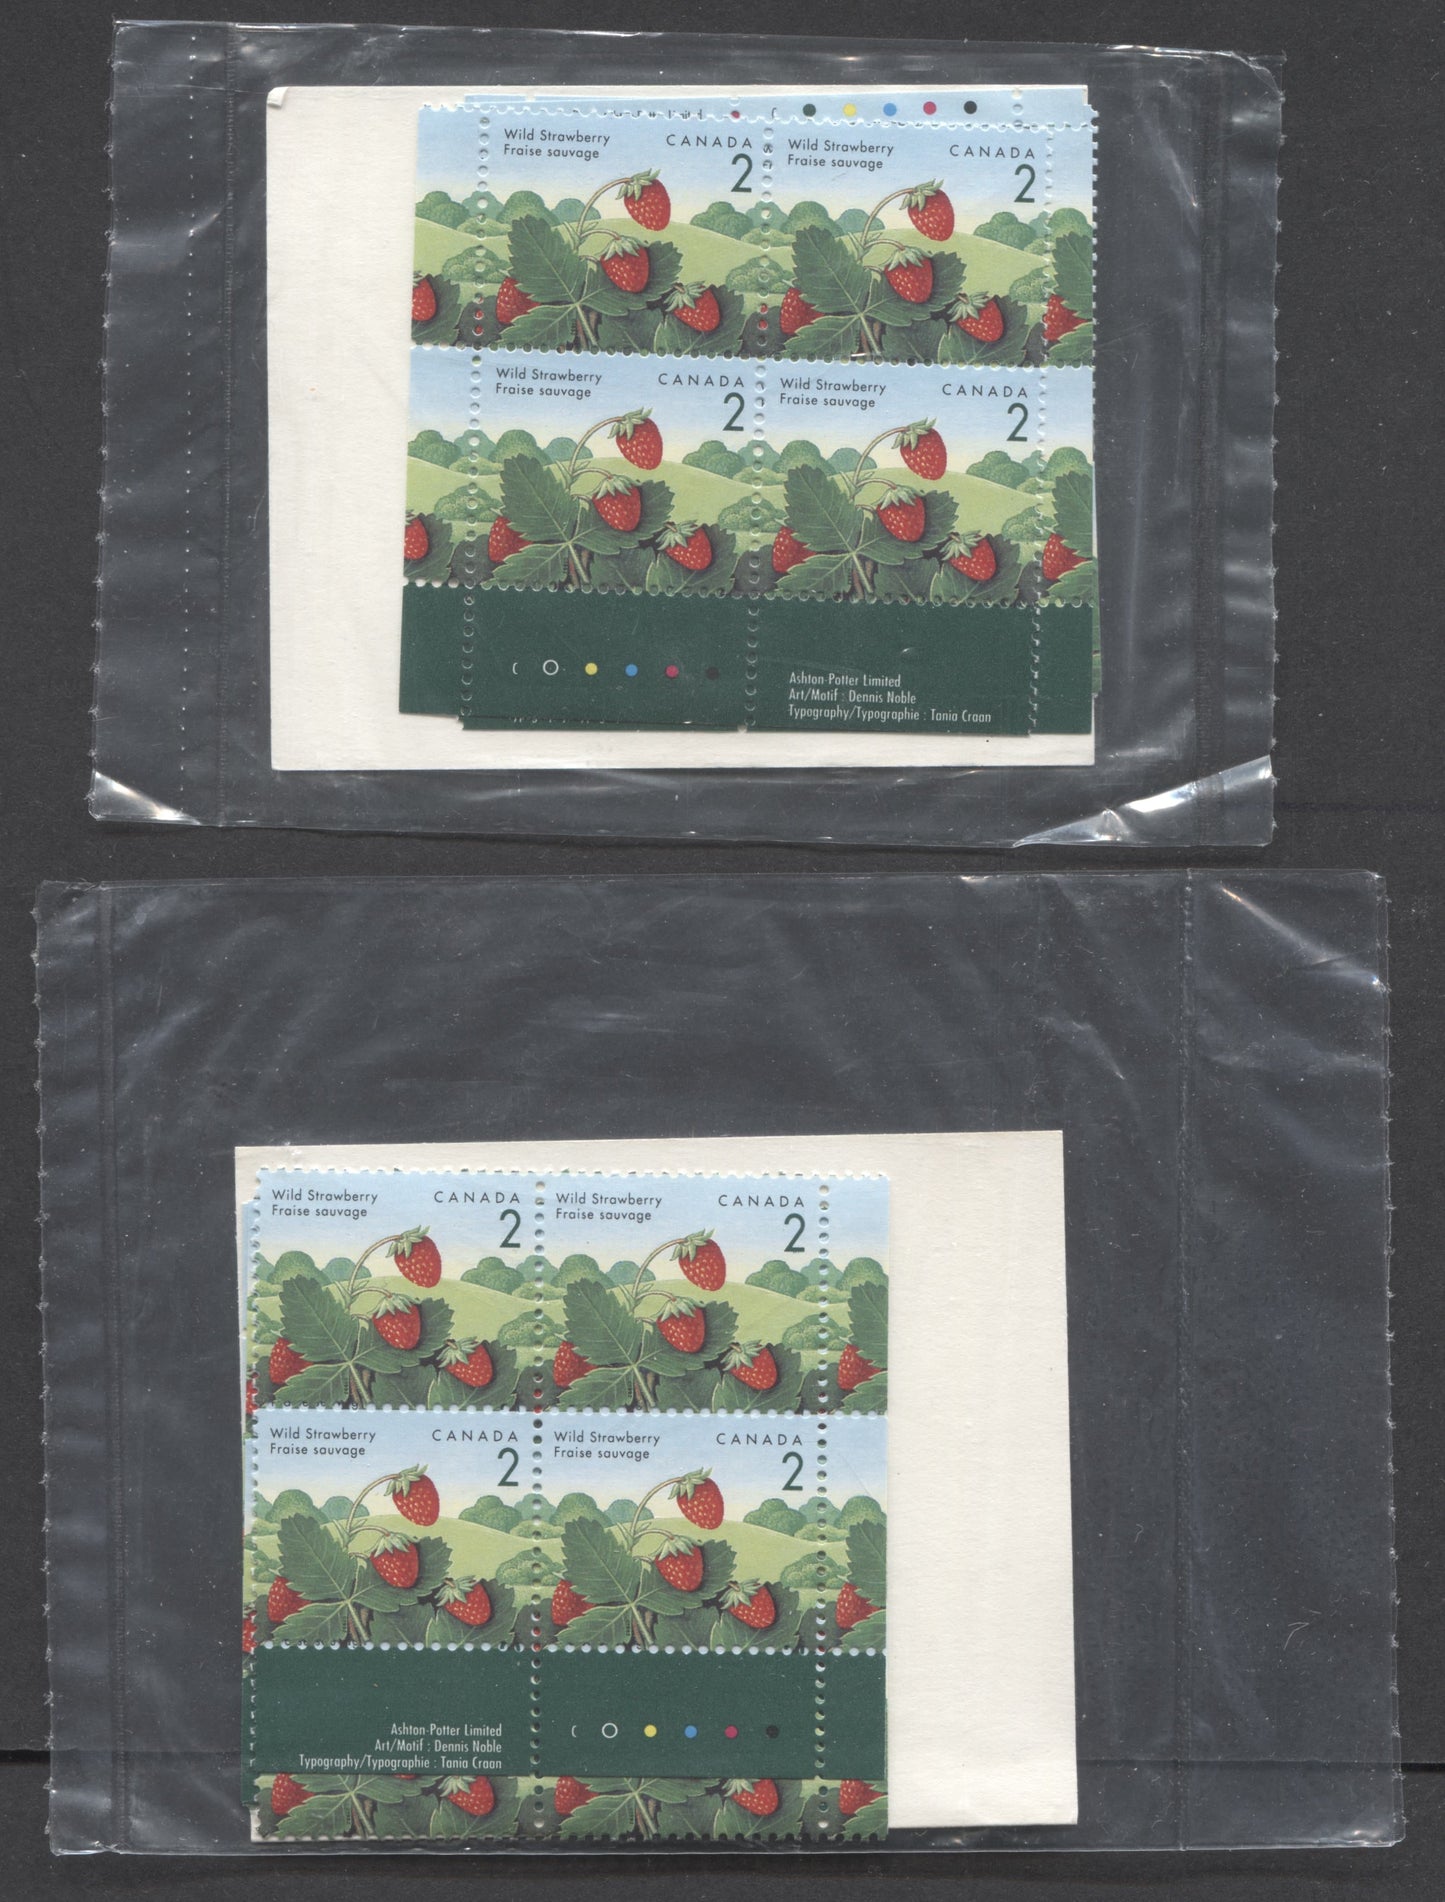 Lot 5 Canada #1350 2c Multicoloured 1992 - 1998 Edible Berries Definitive Issue, Canada Post Sealed Pack of Inscription Blocks, Ashton Potter Canada Printing On DF CPP Paper, With DF Type 5B Insert Card, VFNH, Unitrade Cat. $27.5